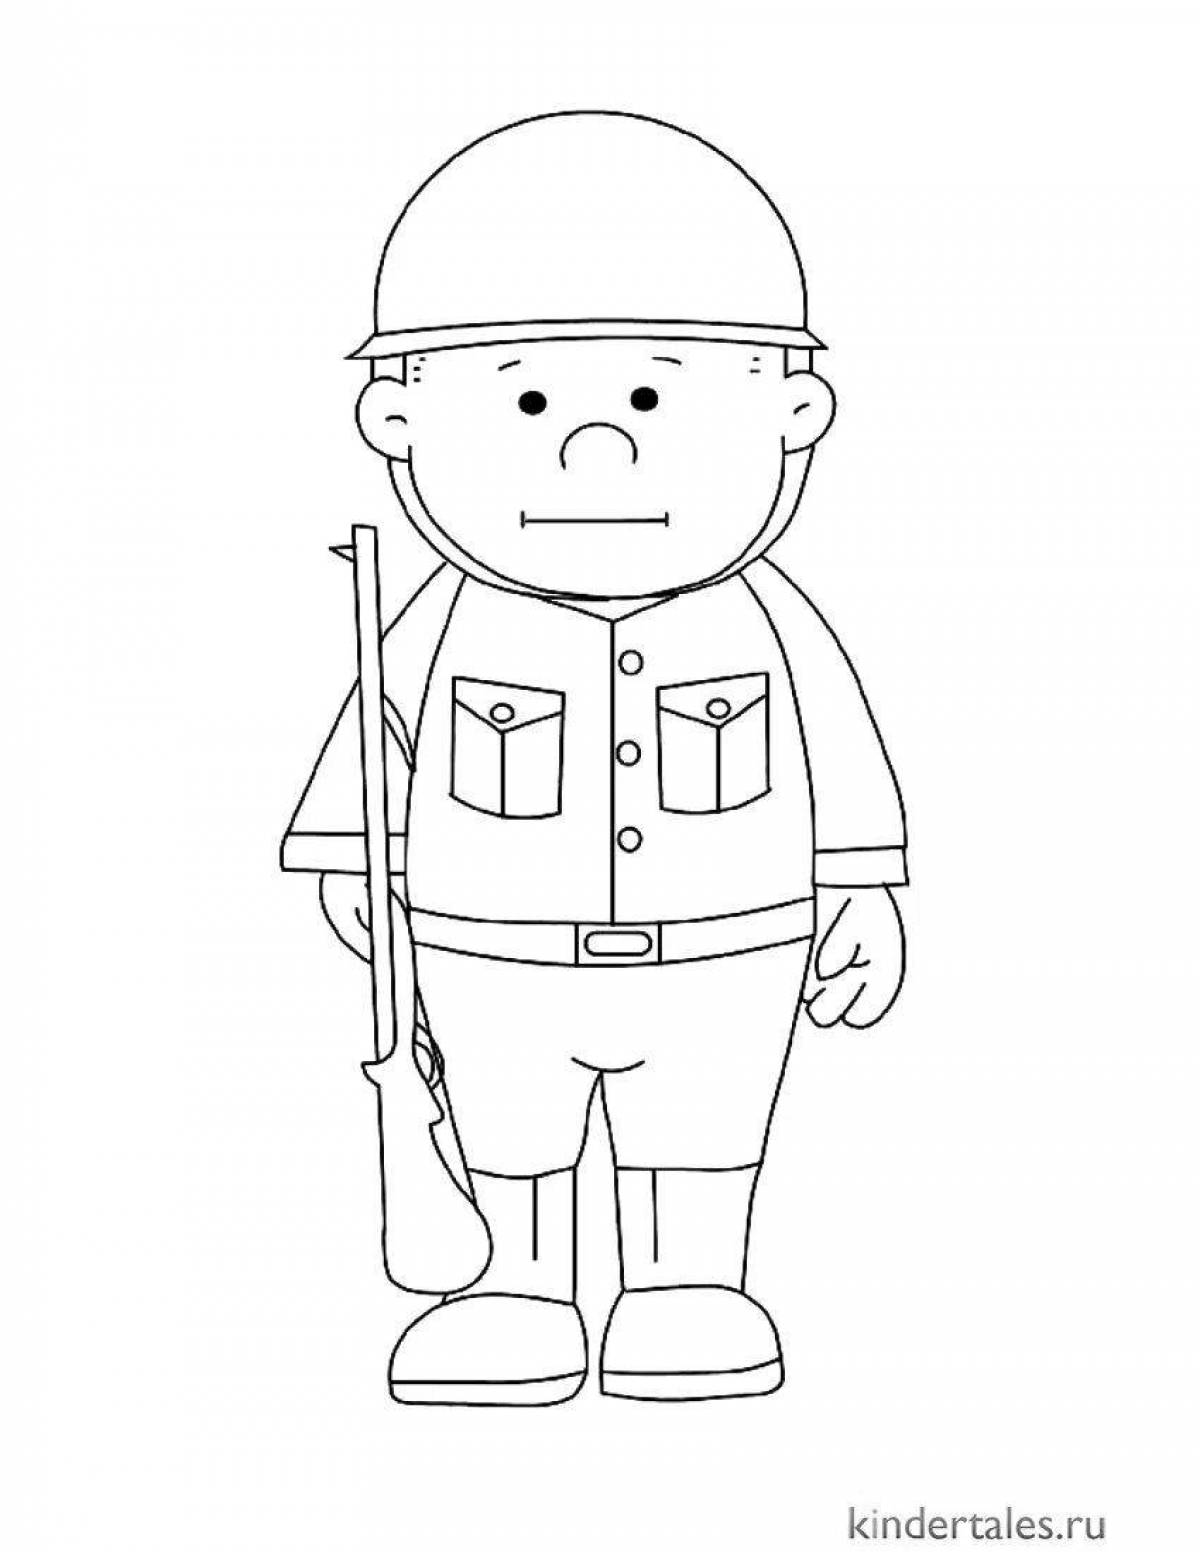 Animated toy soldiers coloring for kids